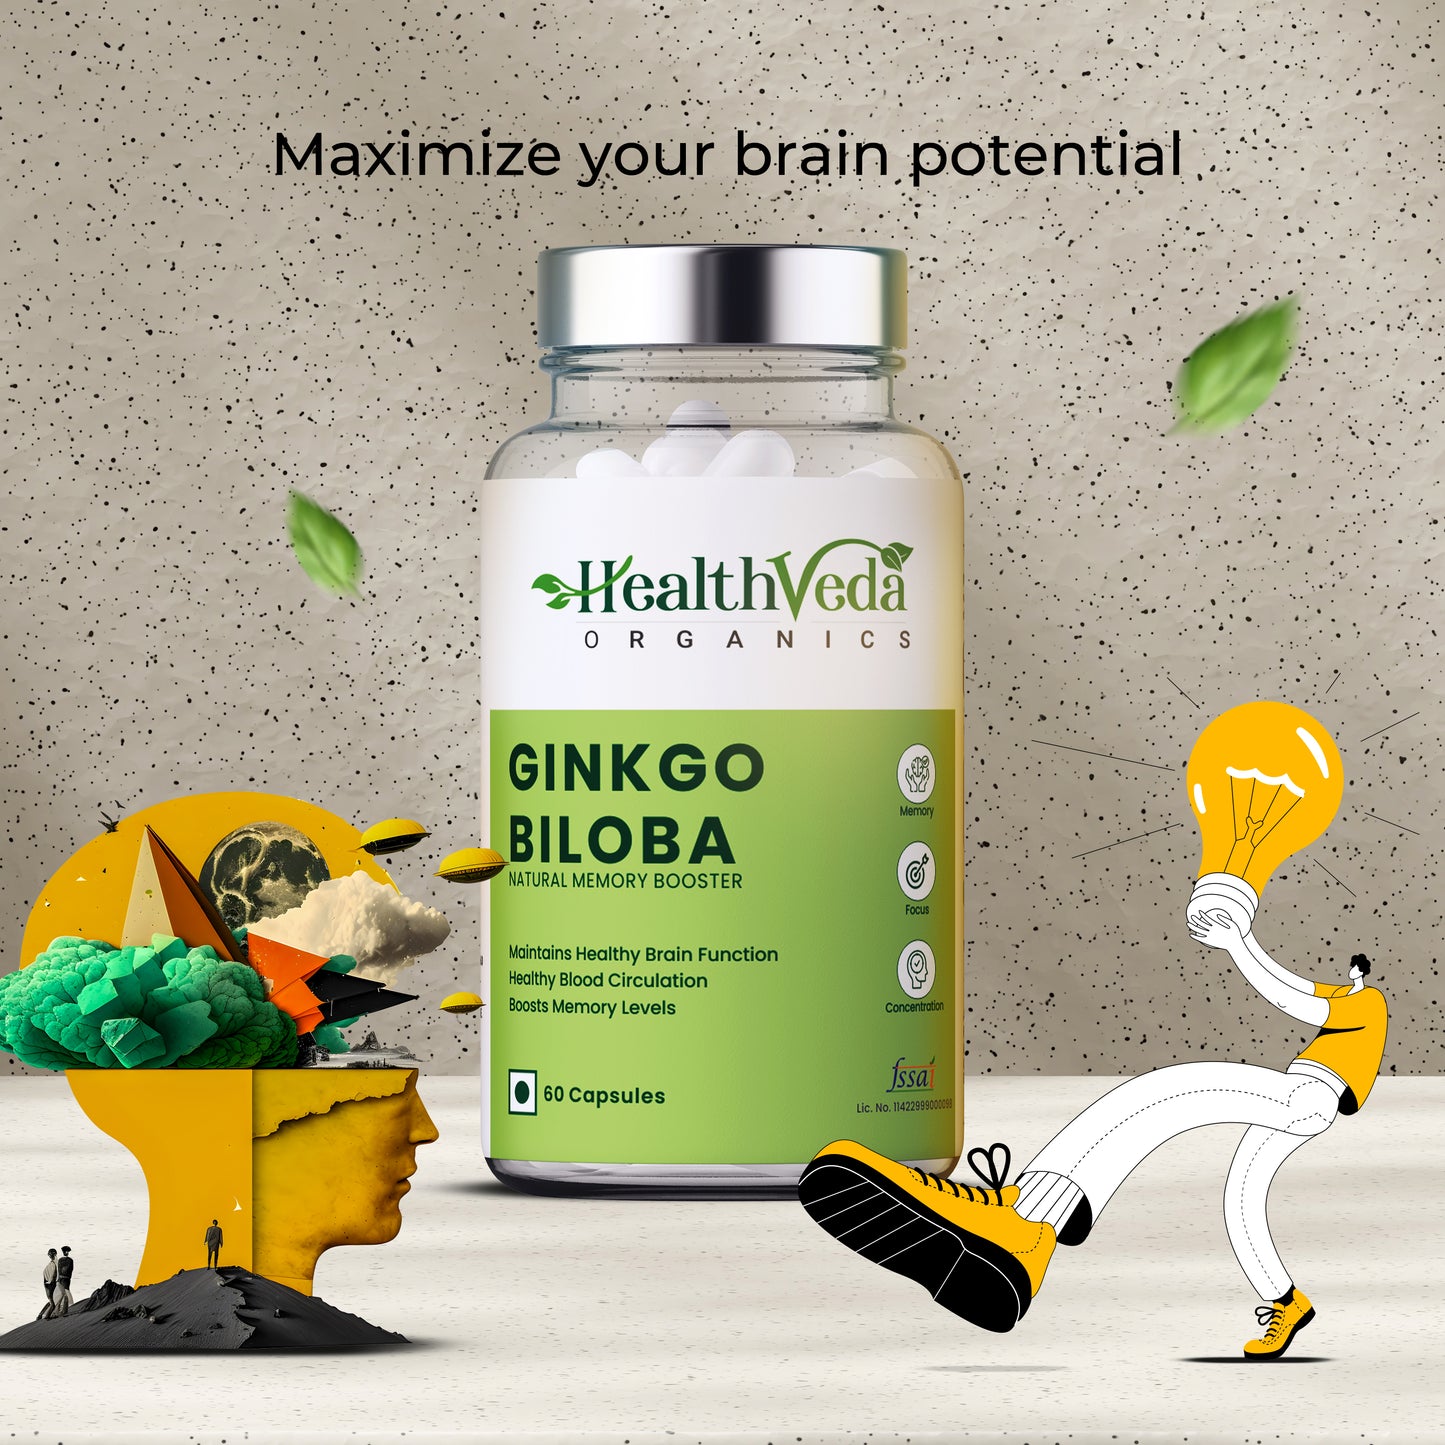 Health Veda Organics Ginkgo Biloba 120 mg Capsules I For Better Concentration, Memory & Learning - 60 Veg Capsules